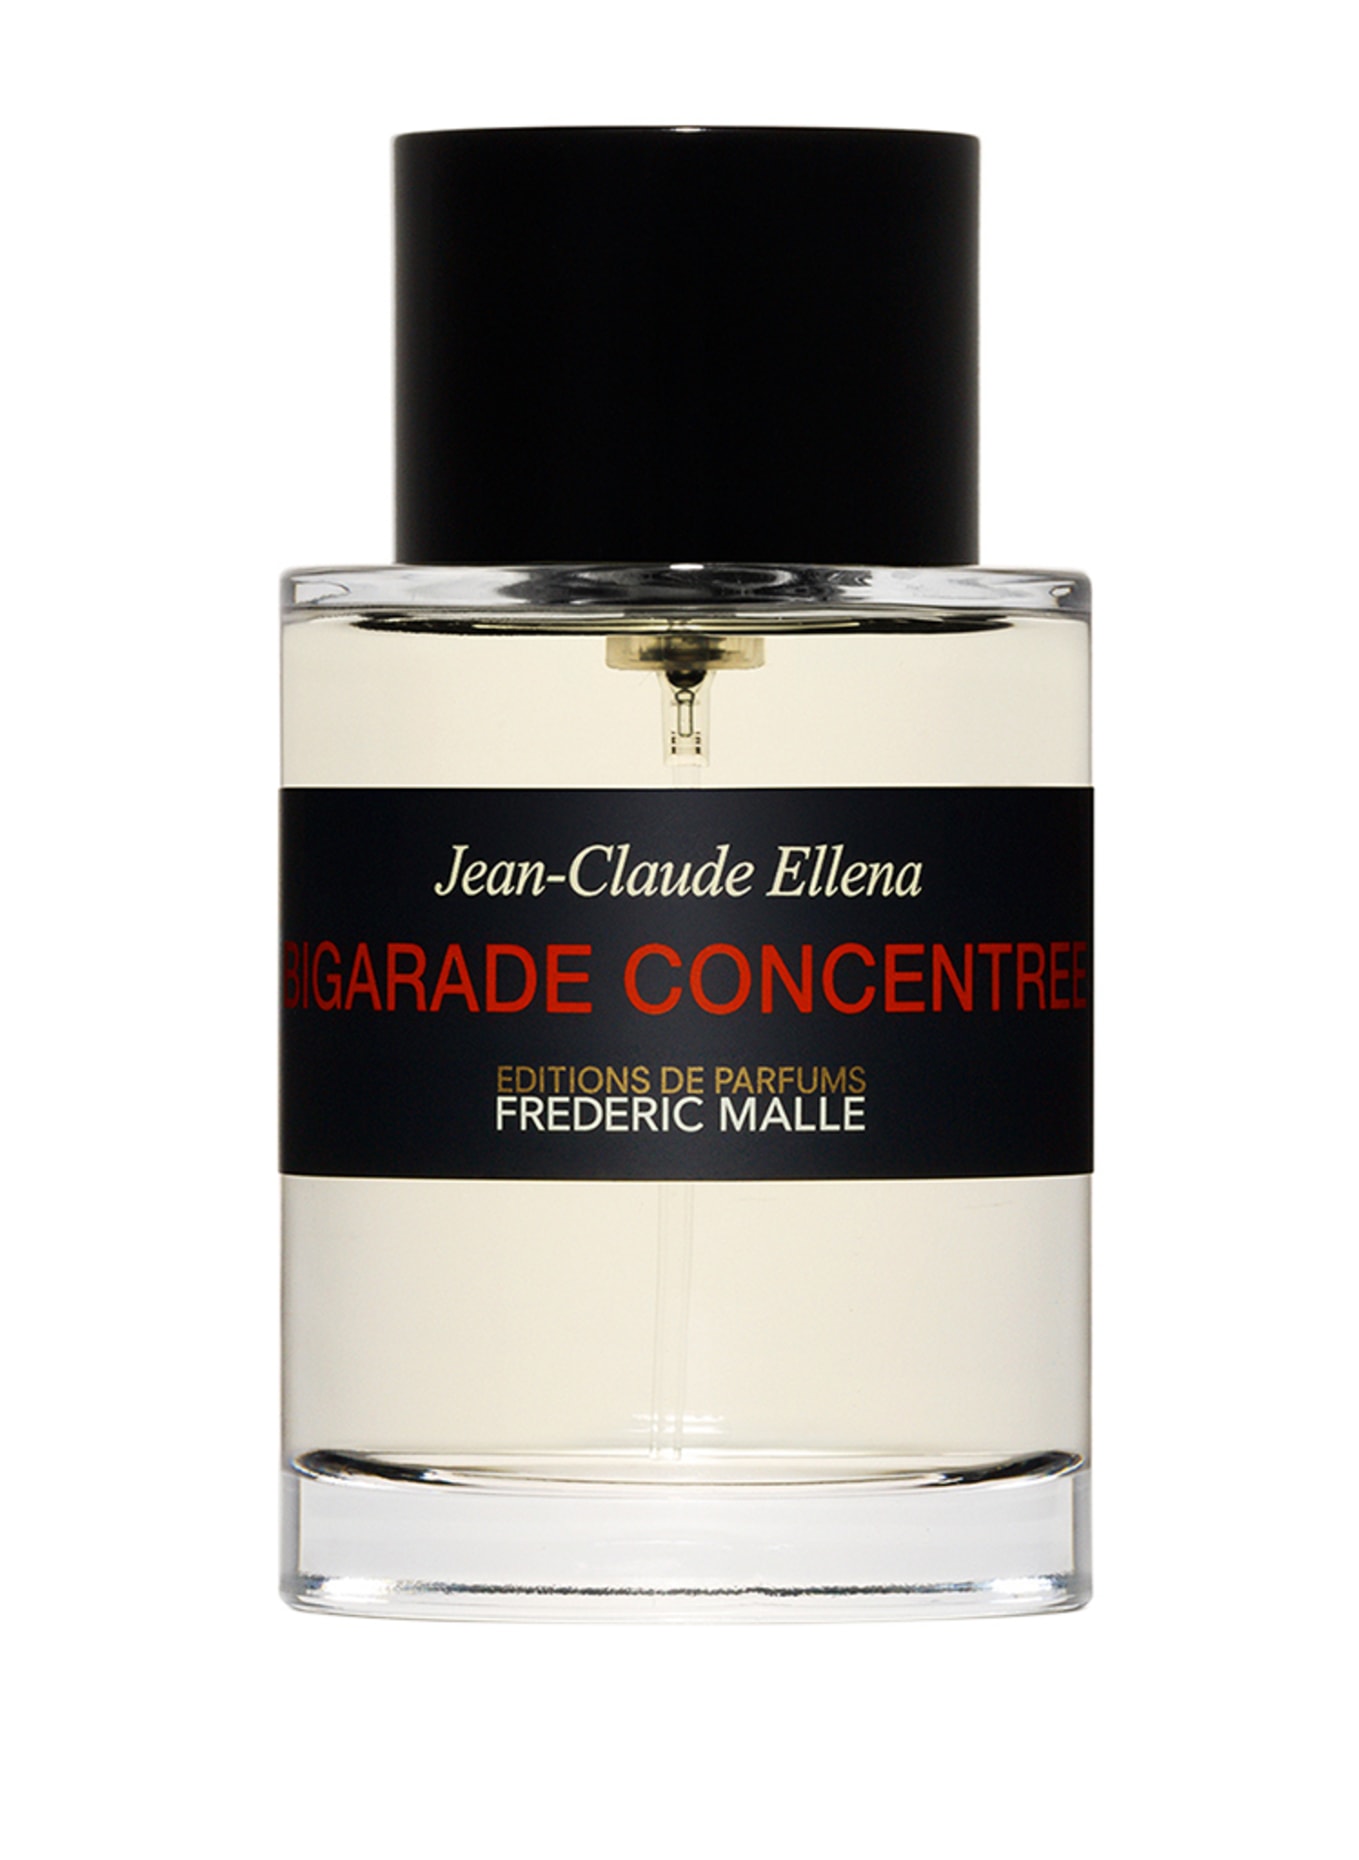 EDITIONS DE PARFUMS FREDERIC MALLE BIGARADE CONCENTREE (Obrazek 1)